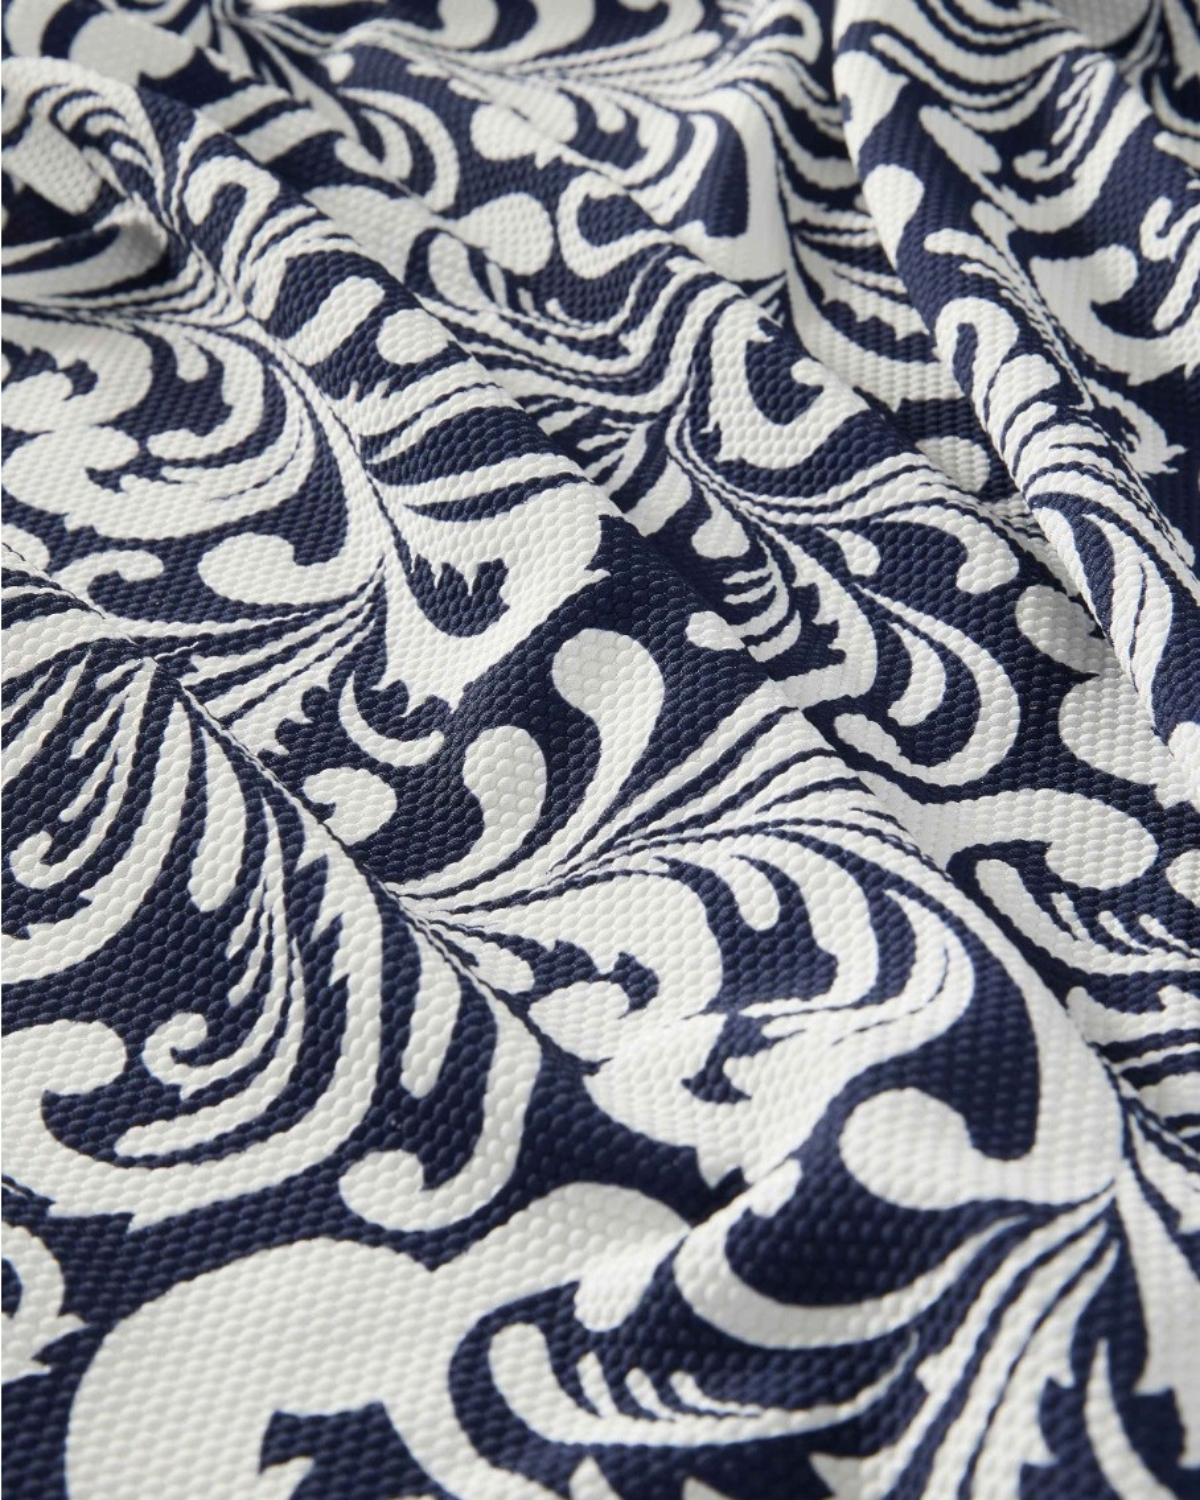 Color swatch of a navy and white scroll print